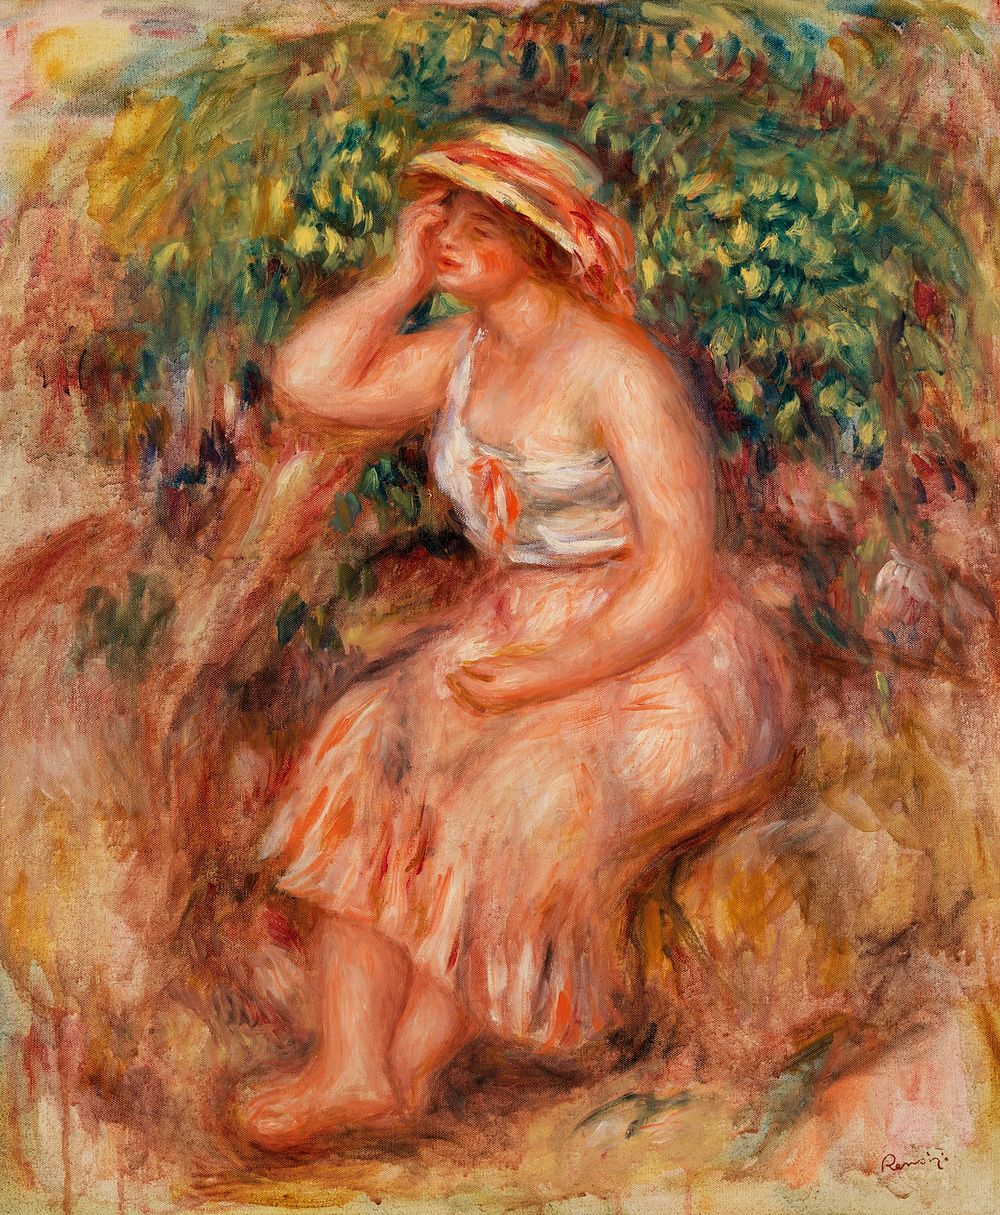 Woman Daydreaming (R&ecirc;veuse) (1913) by Pierre-Auguste Renoir. Original from Barnes Foundation. Digitally enhanced by…